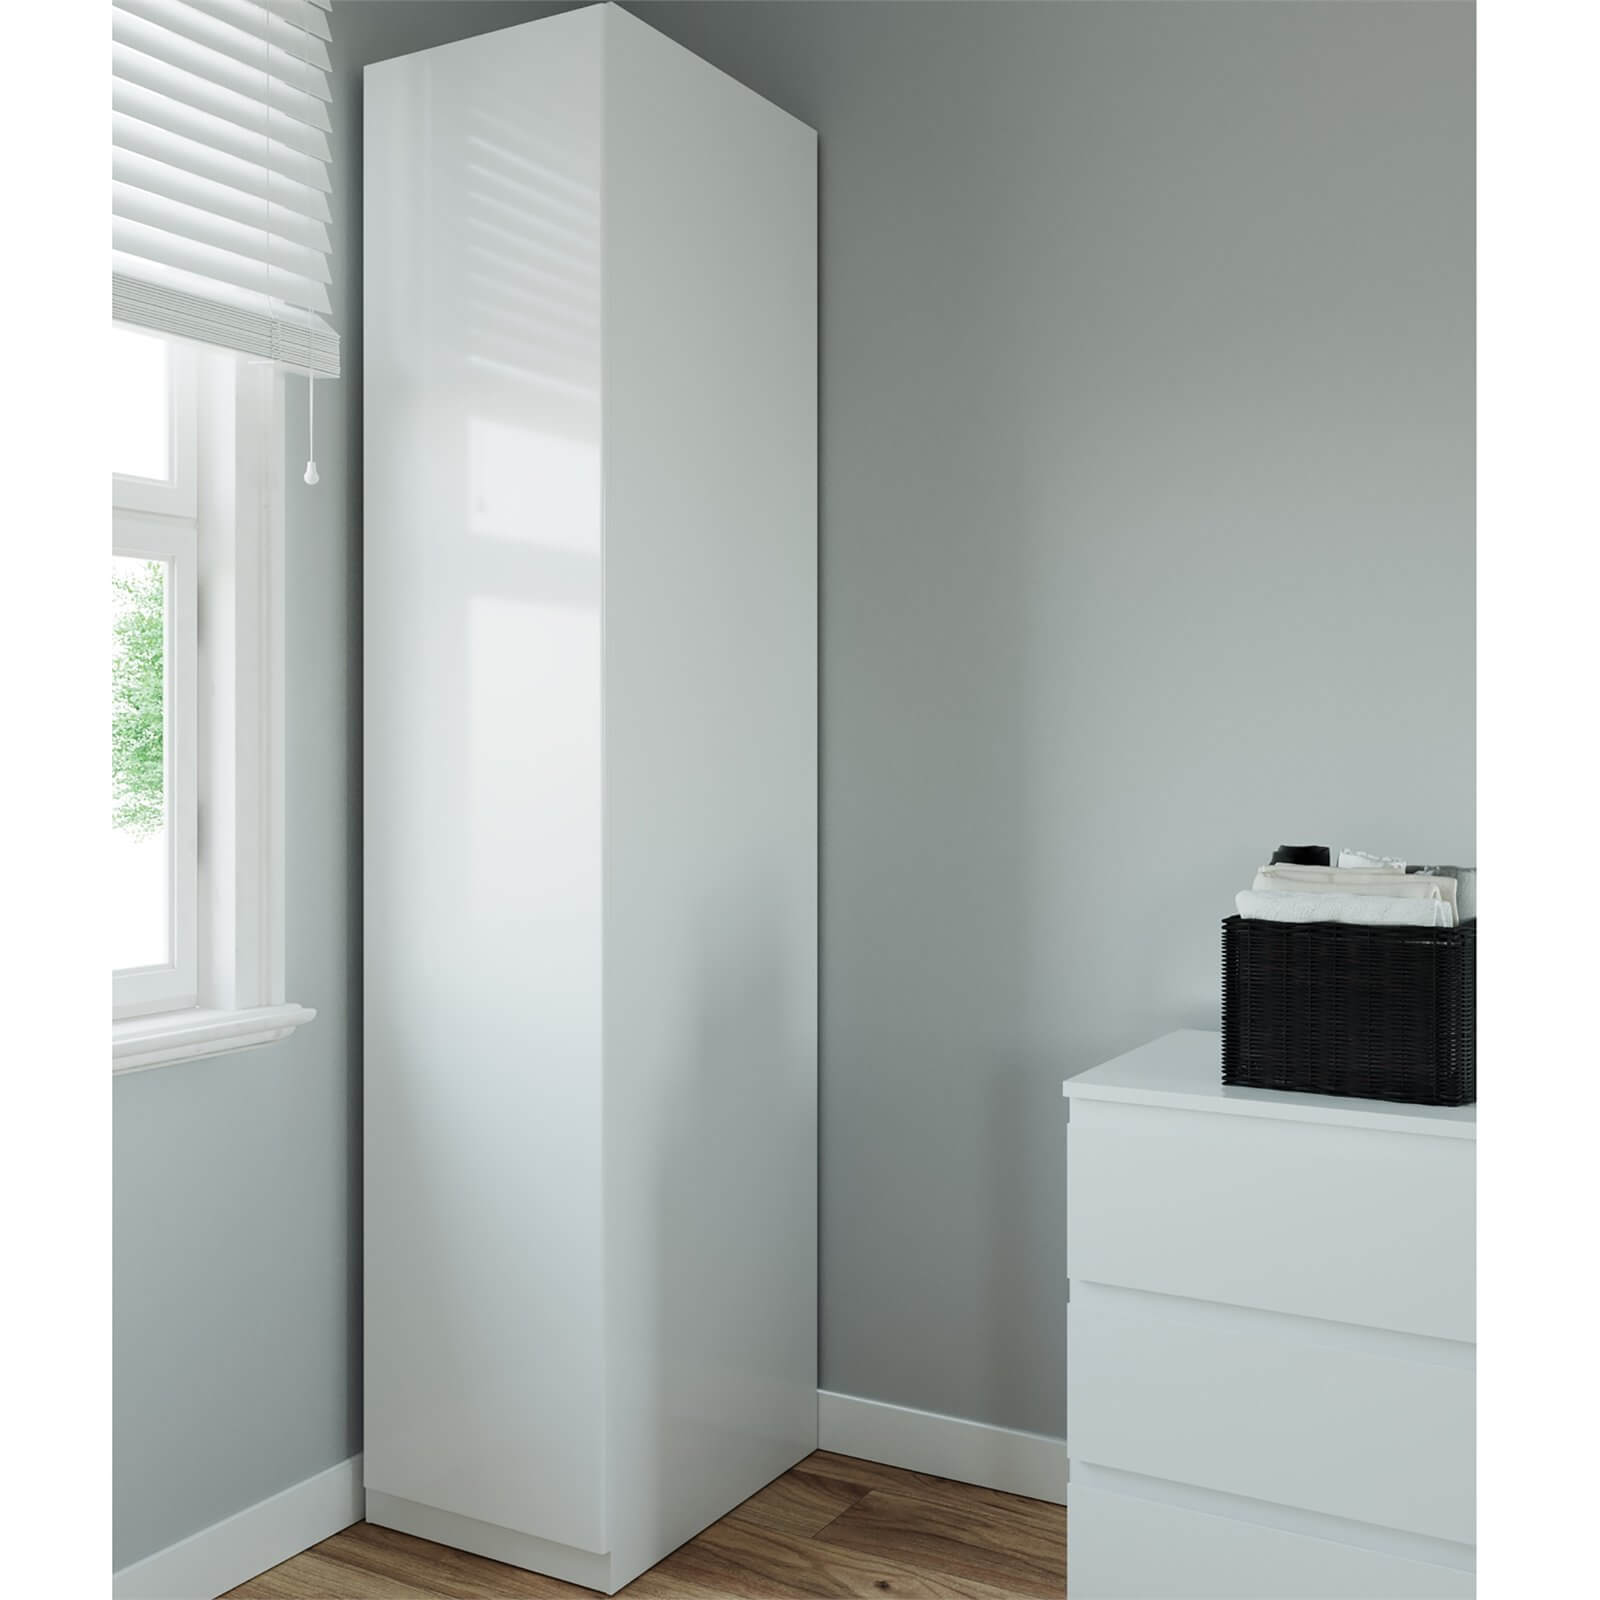 Fitted Bedroom Handleless Single Wardrobe - White